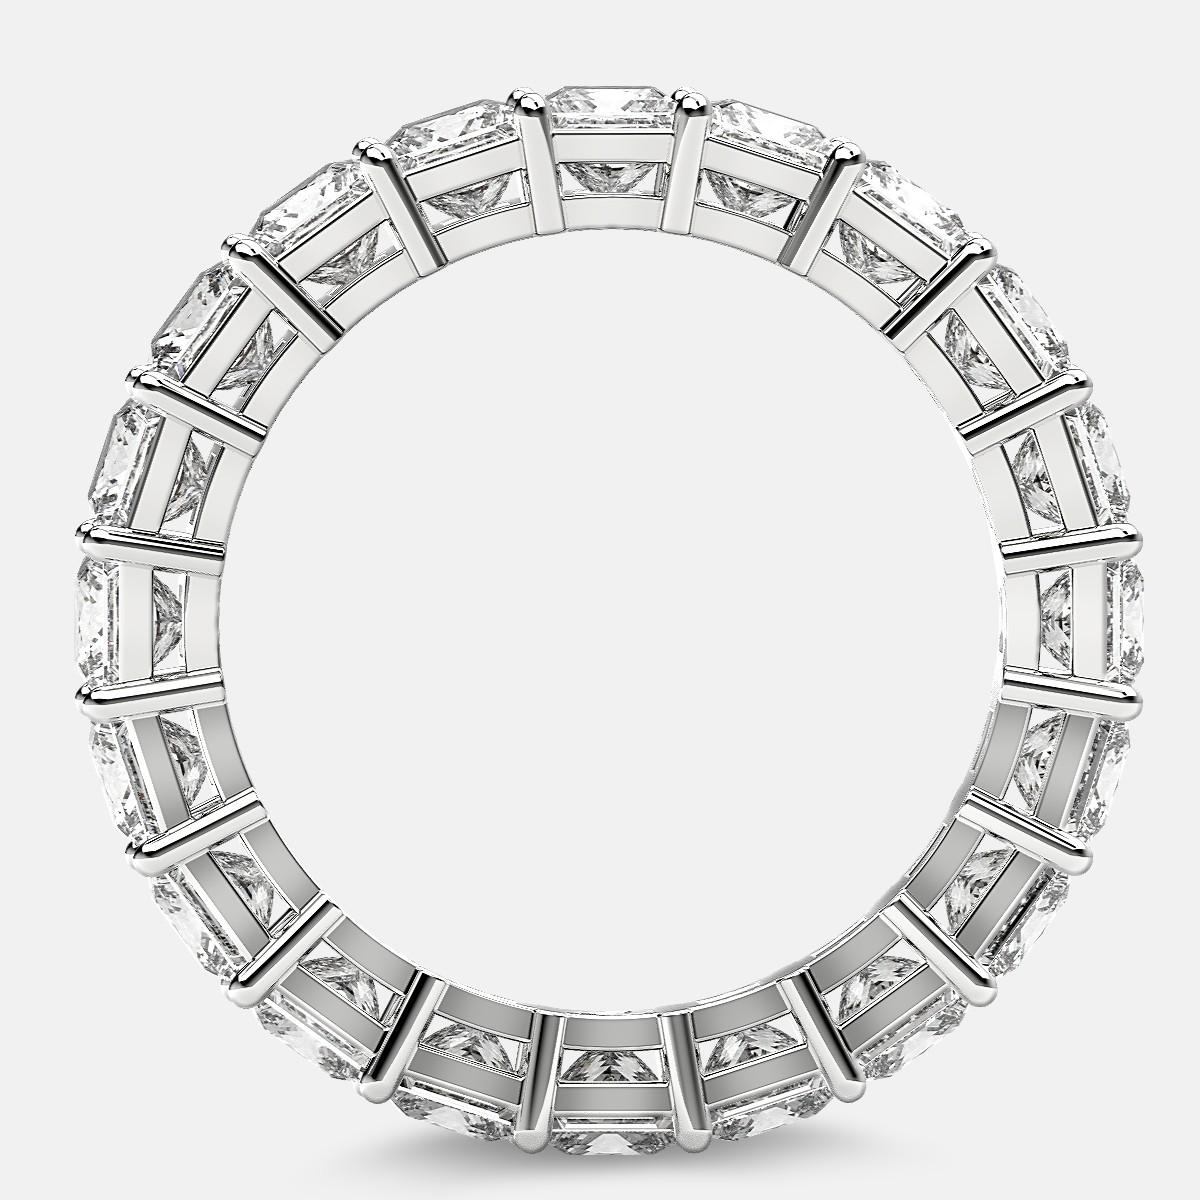 Eternity Ring with Prong Set Princess Cut Diamonds in 18k White Gold